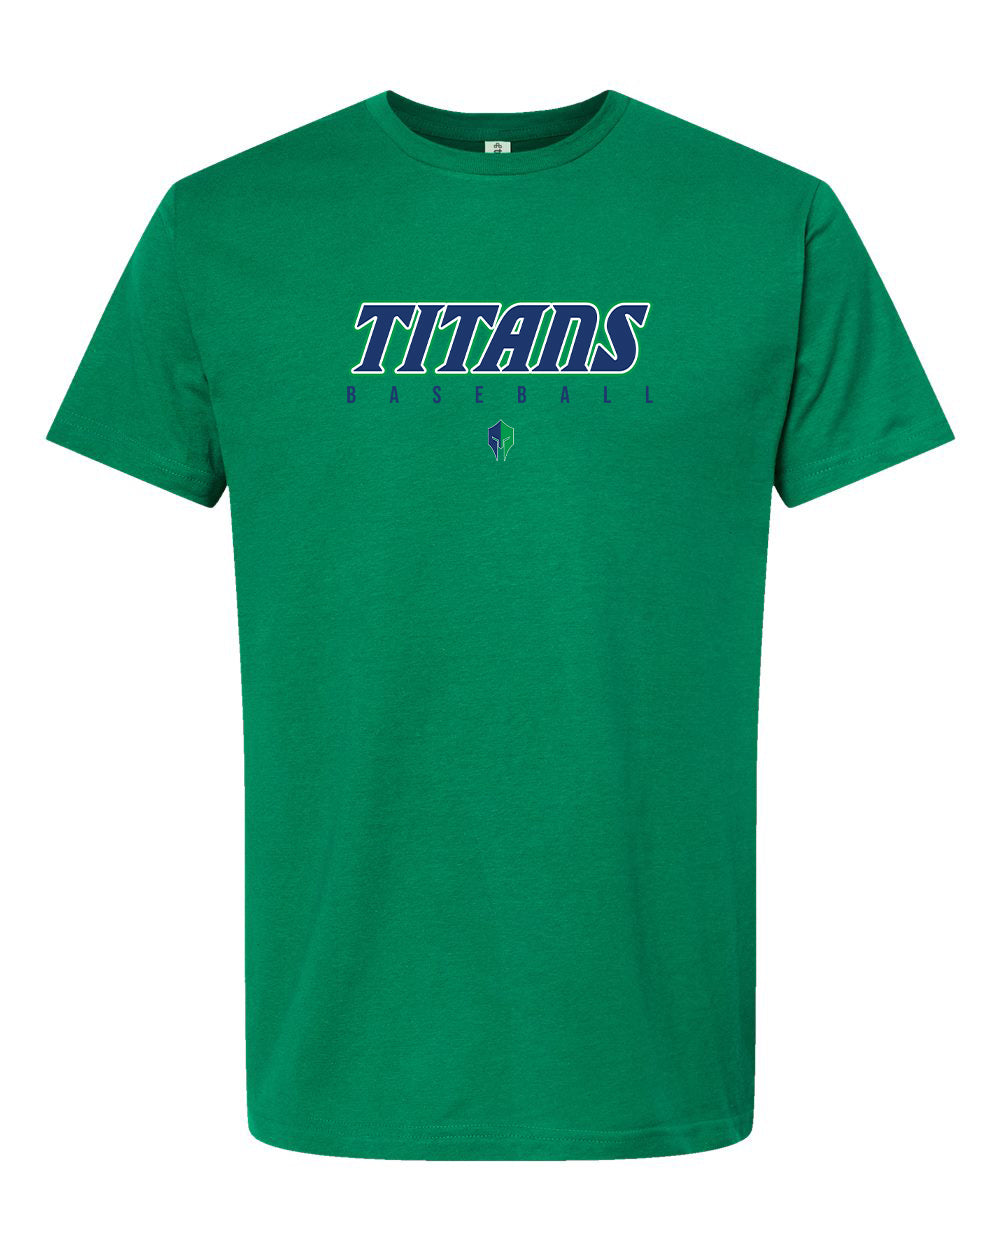 Titans Adult Tee "TB" - 202 (color options available)